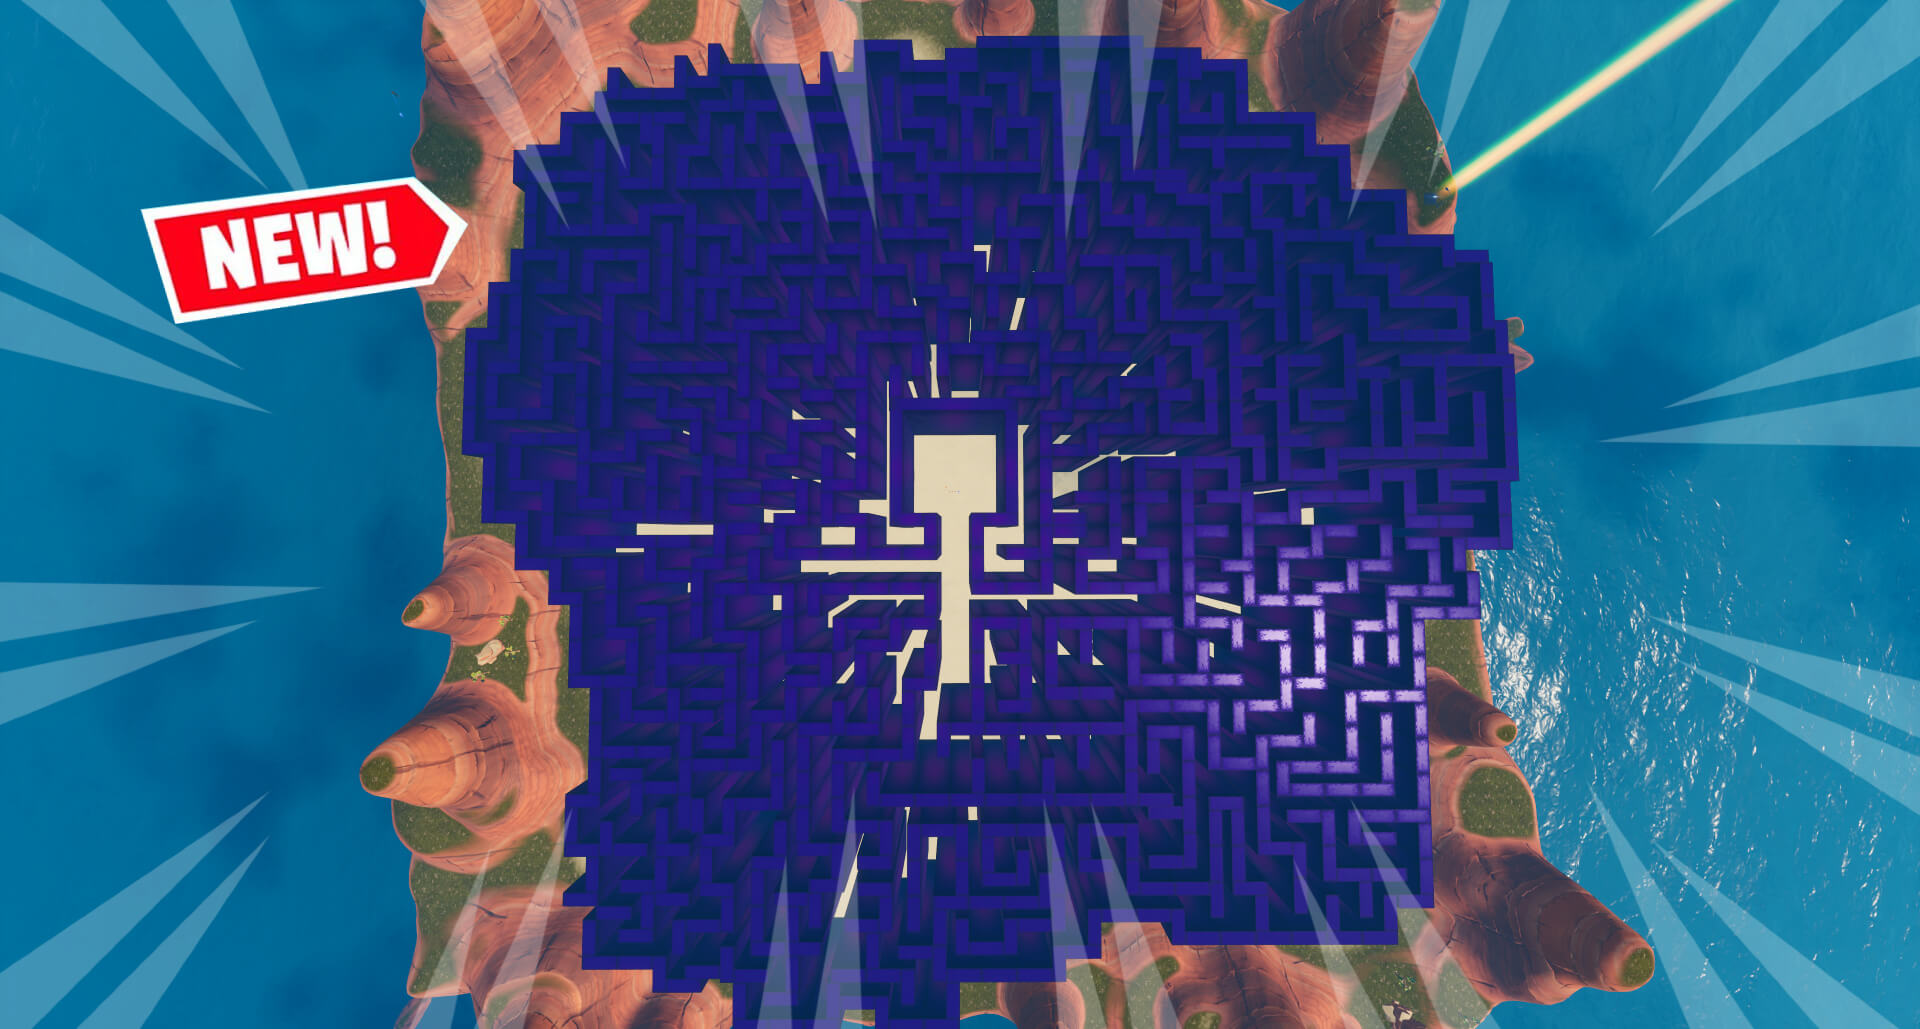 THE ULTIMATE KEVIN THE CUBE MAZE!